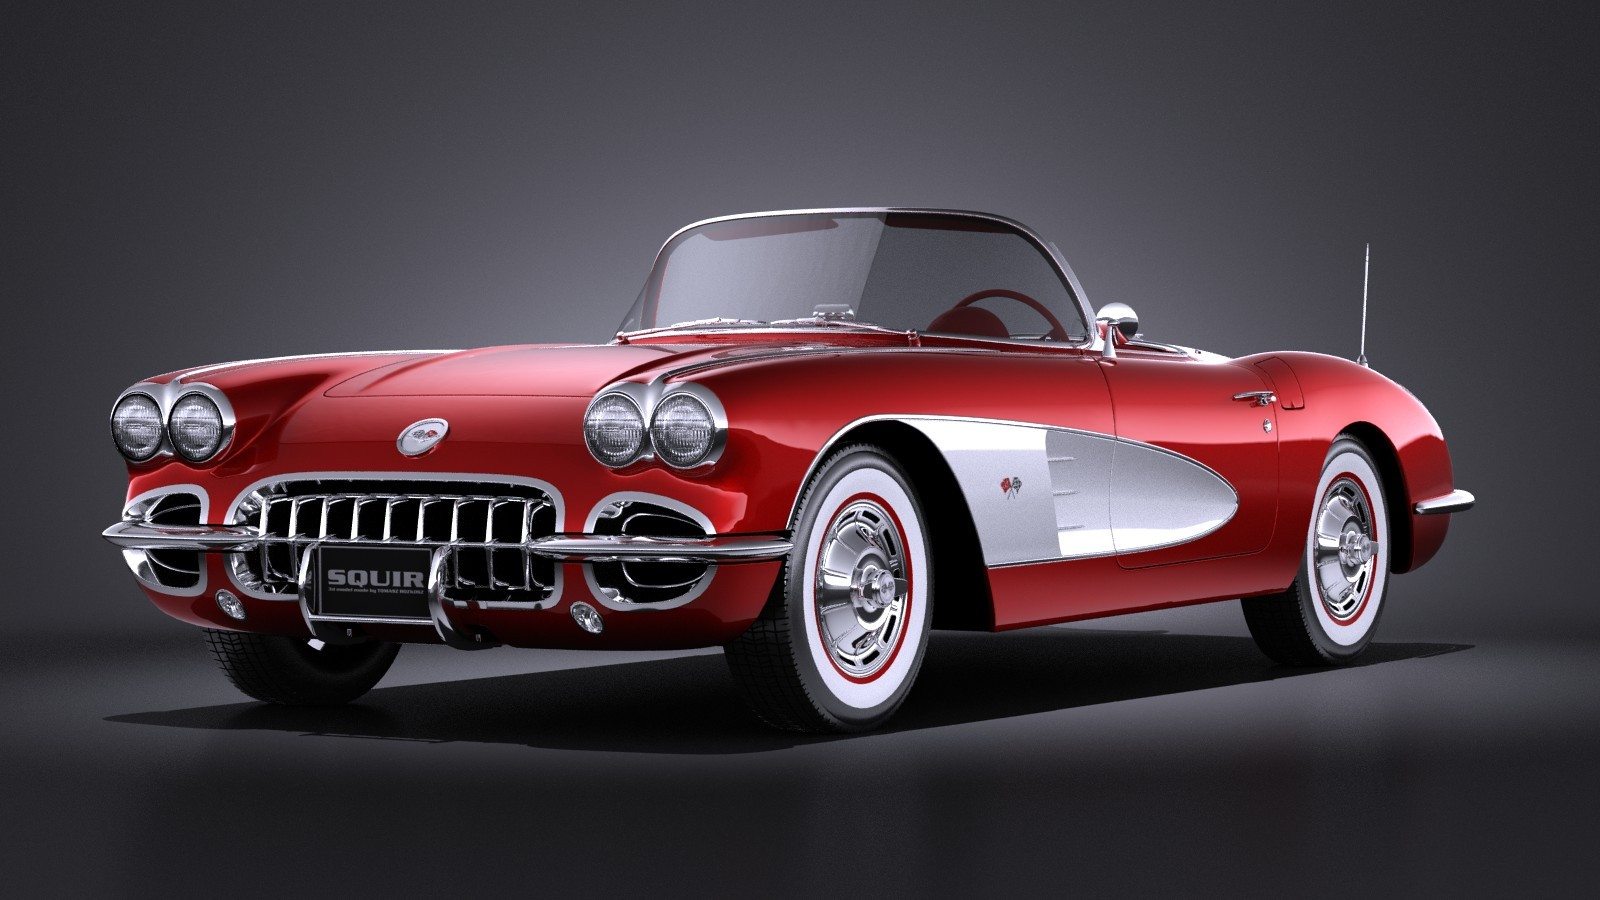 Classic red 1958 Chevy Corvette, showcasing its sleek design and iconic vintage charm